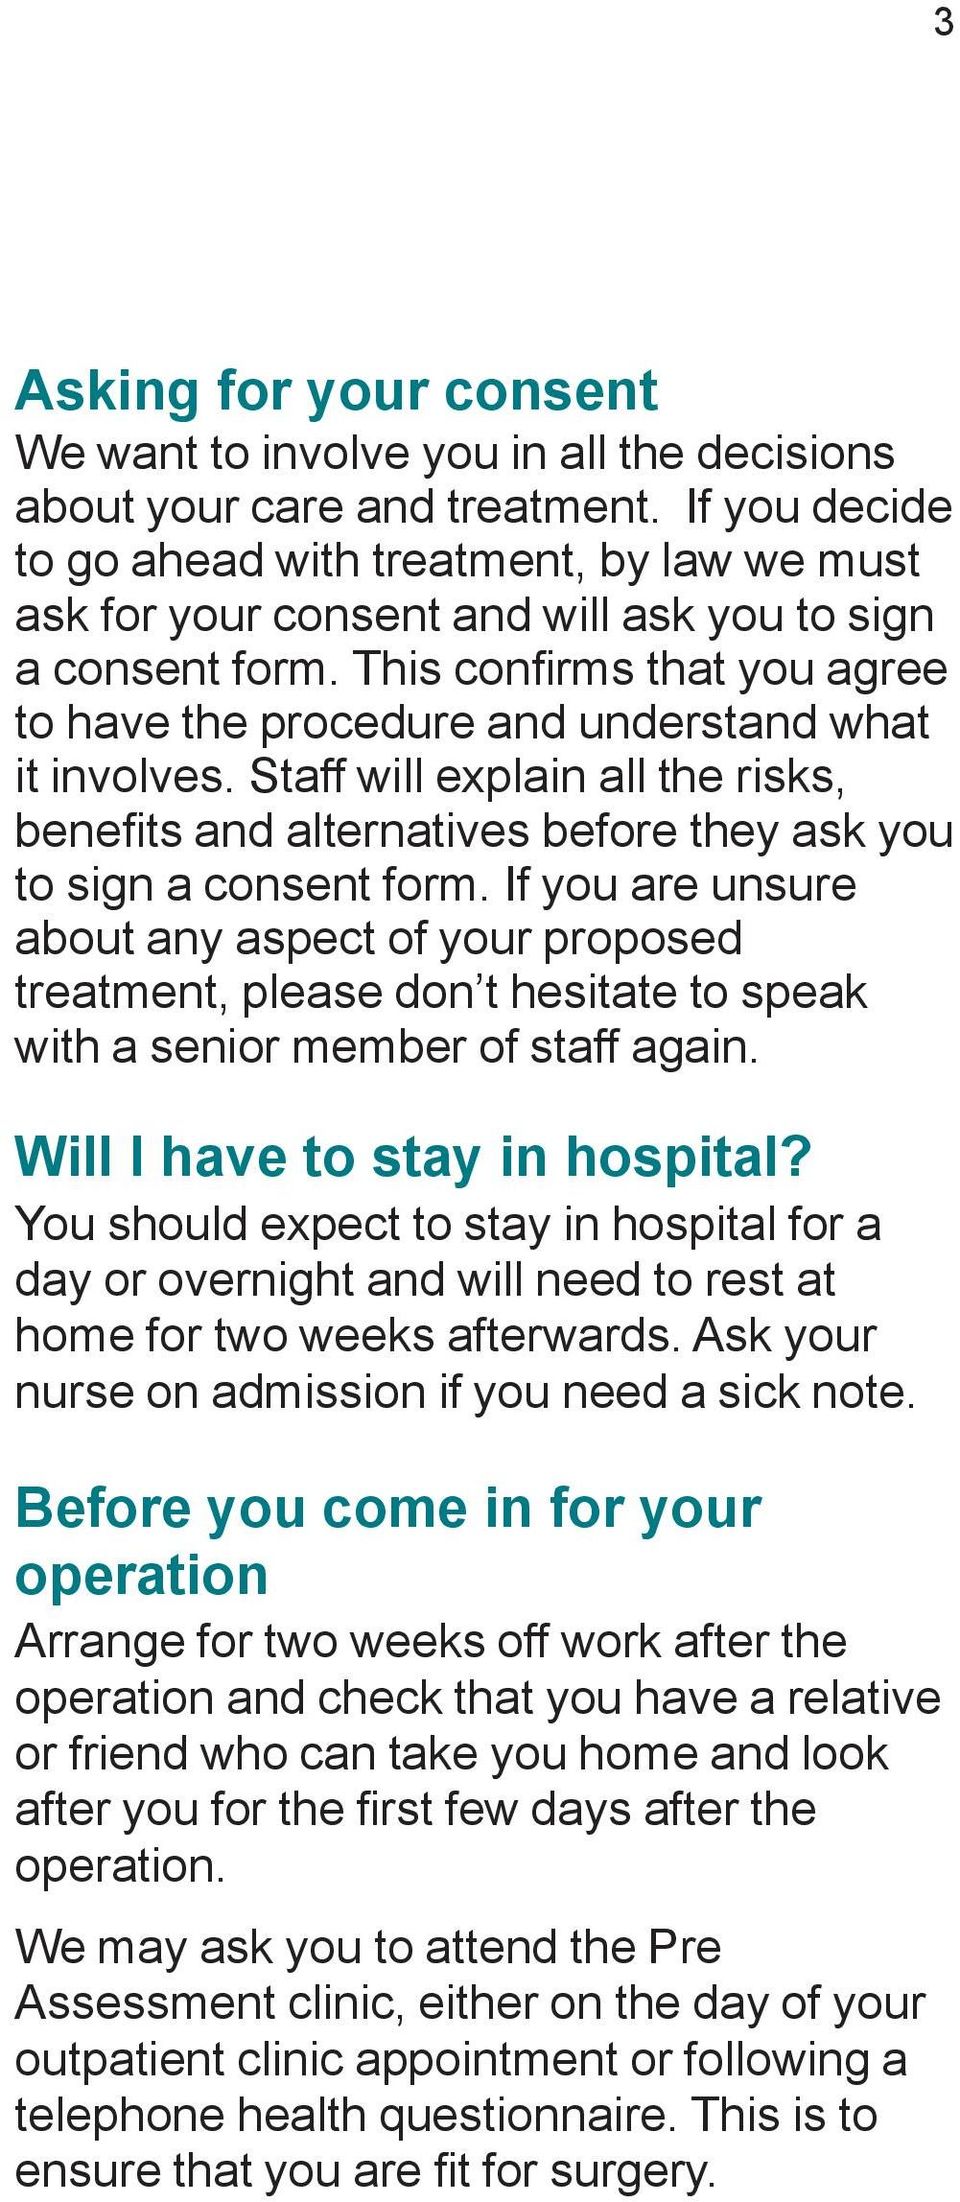 This confi rms that you agree to have the procedure and understand what it involves. Staff will explain all the risks, benefi ts and alternatives before they ask you to sign a consent form.